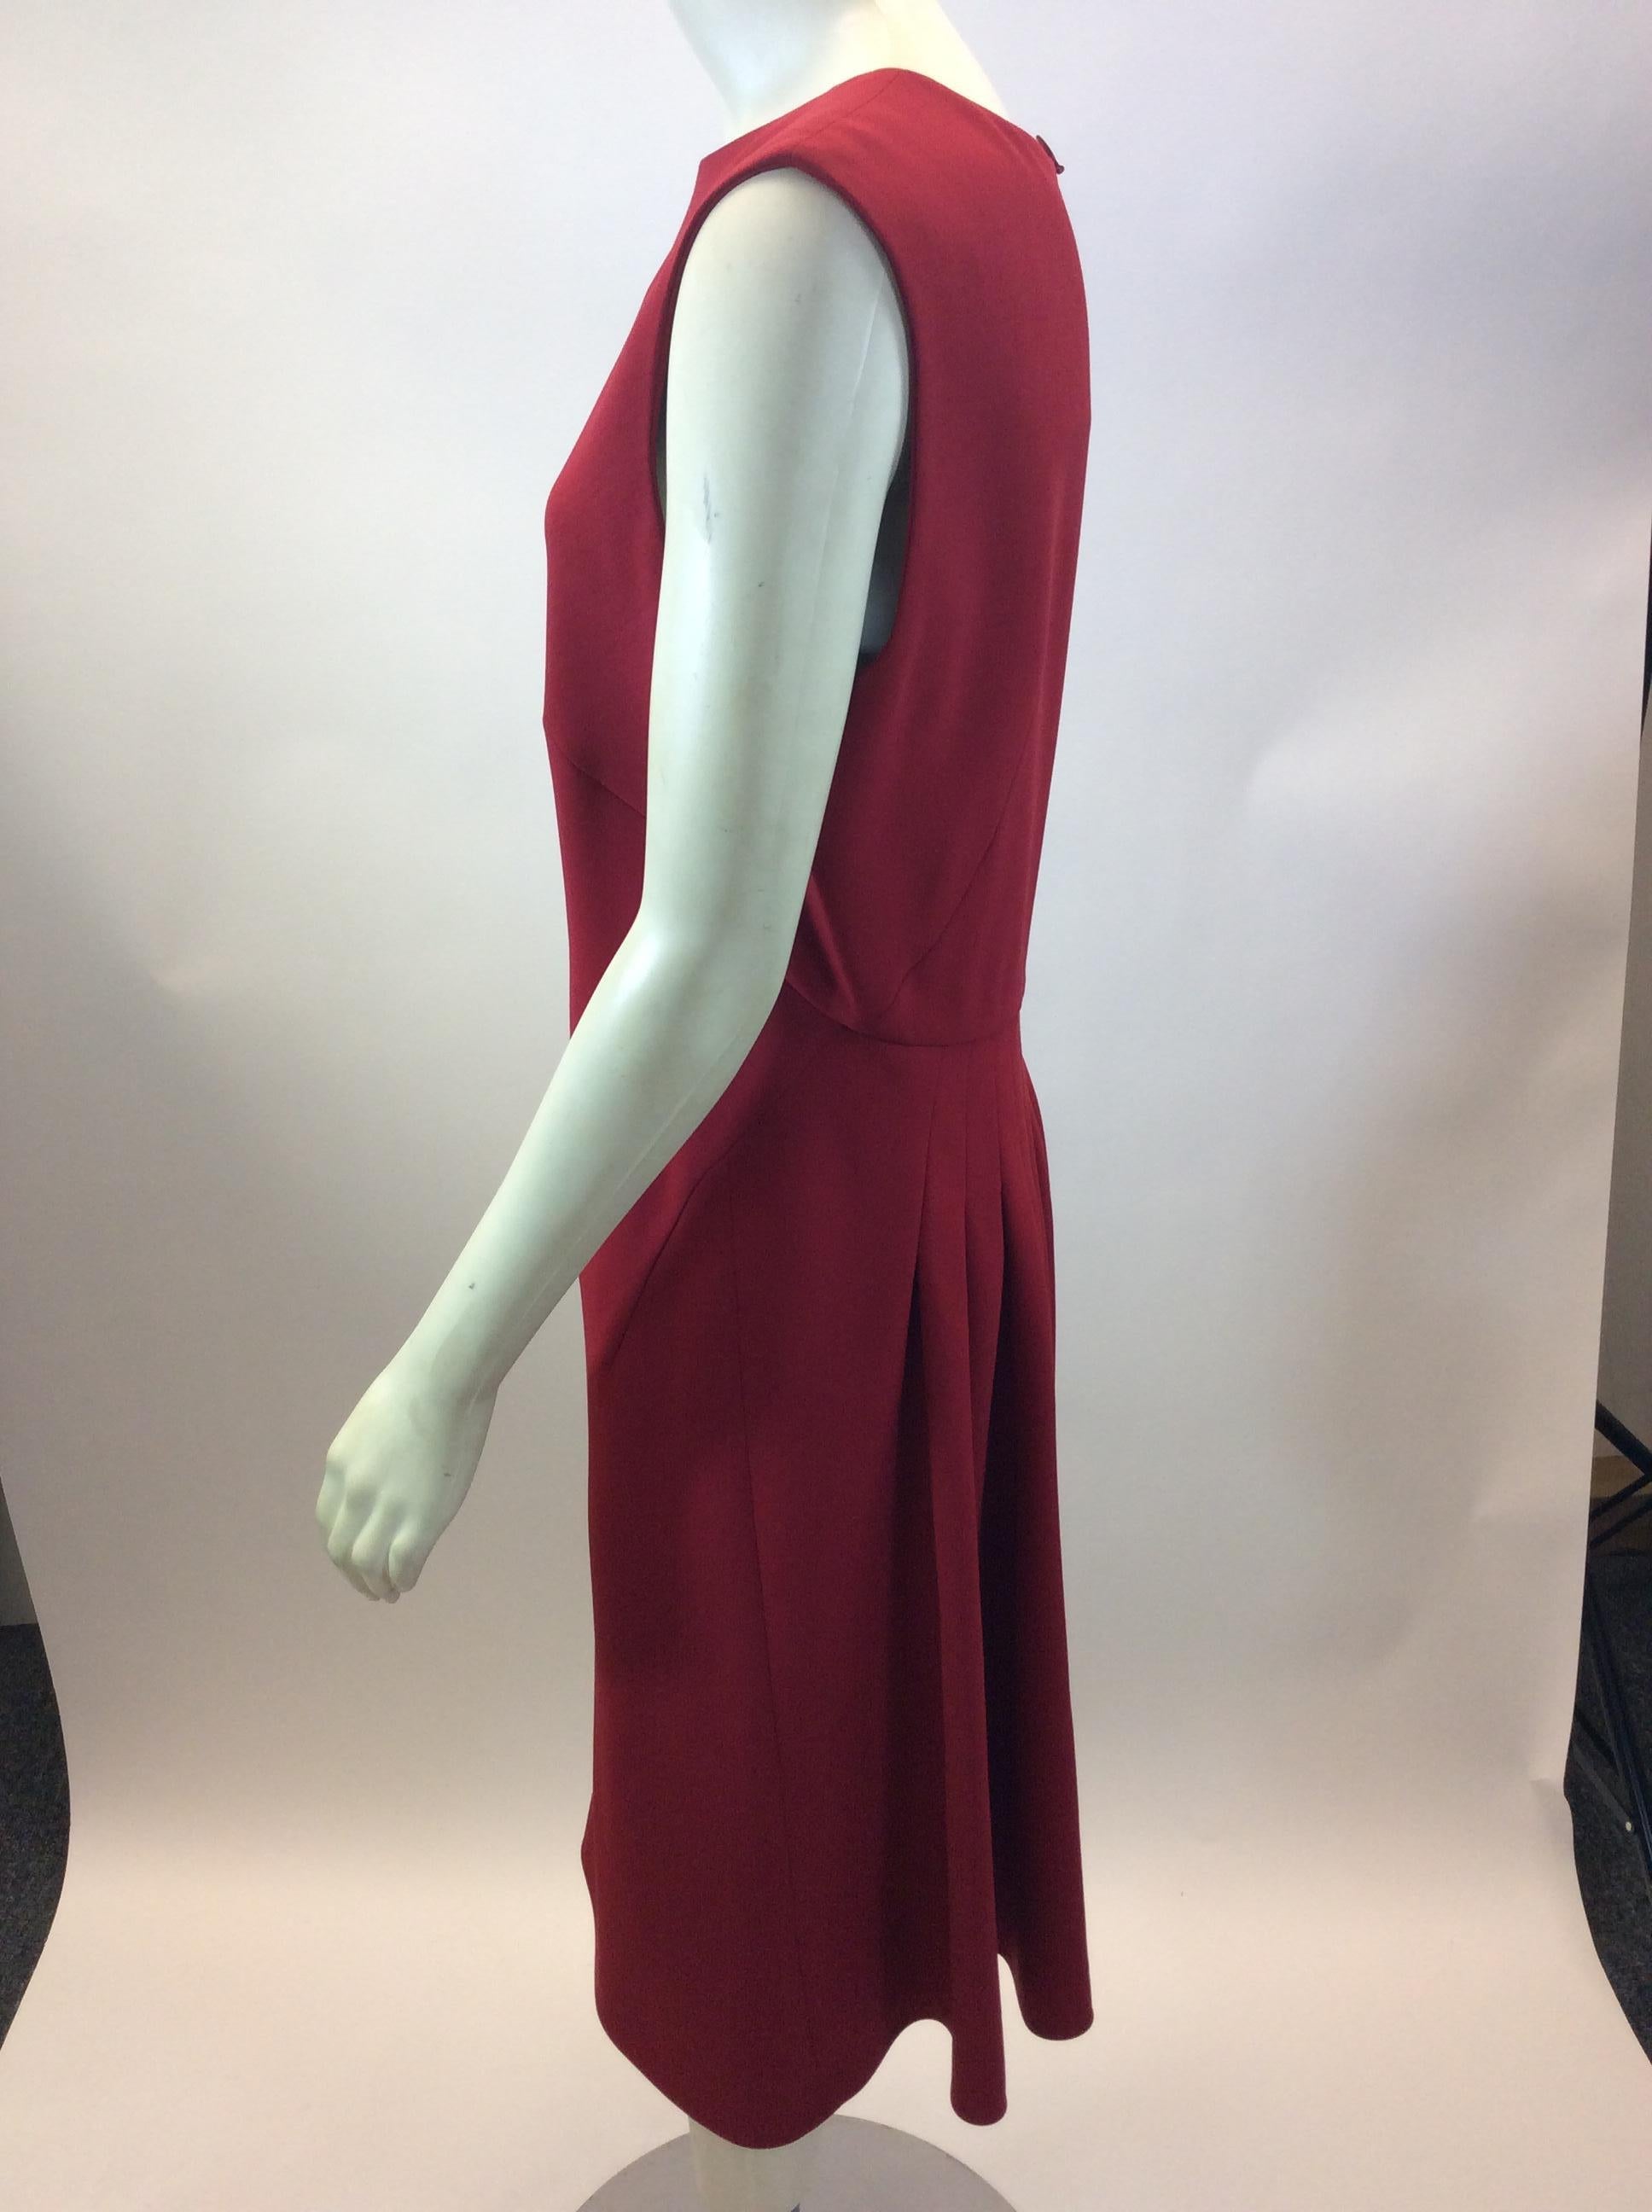 Giorgio Armani Red Wool Dress NWT
$299
Made in Italy
100% wool
Size 46
Length 40.5